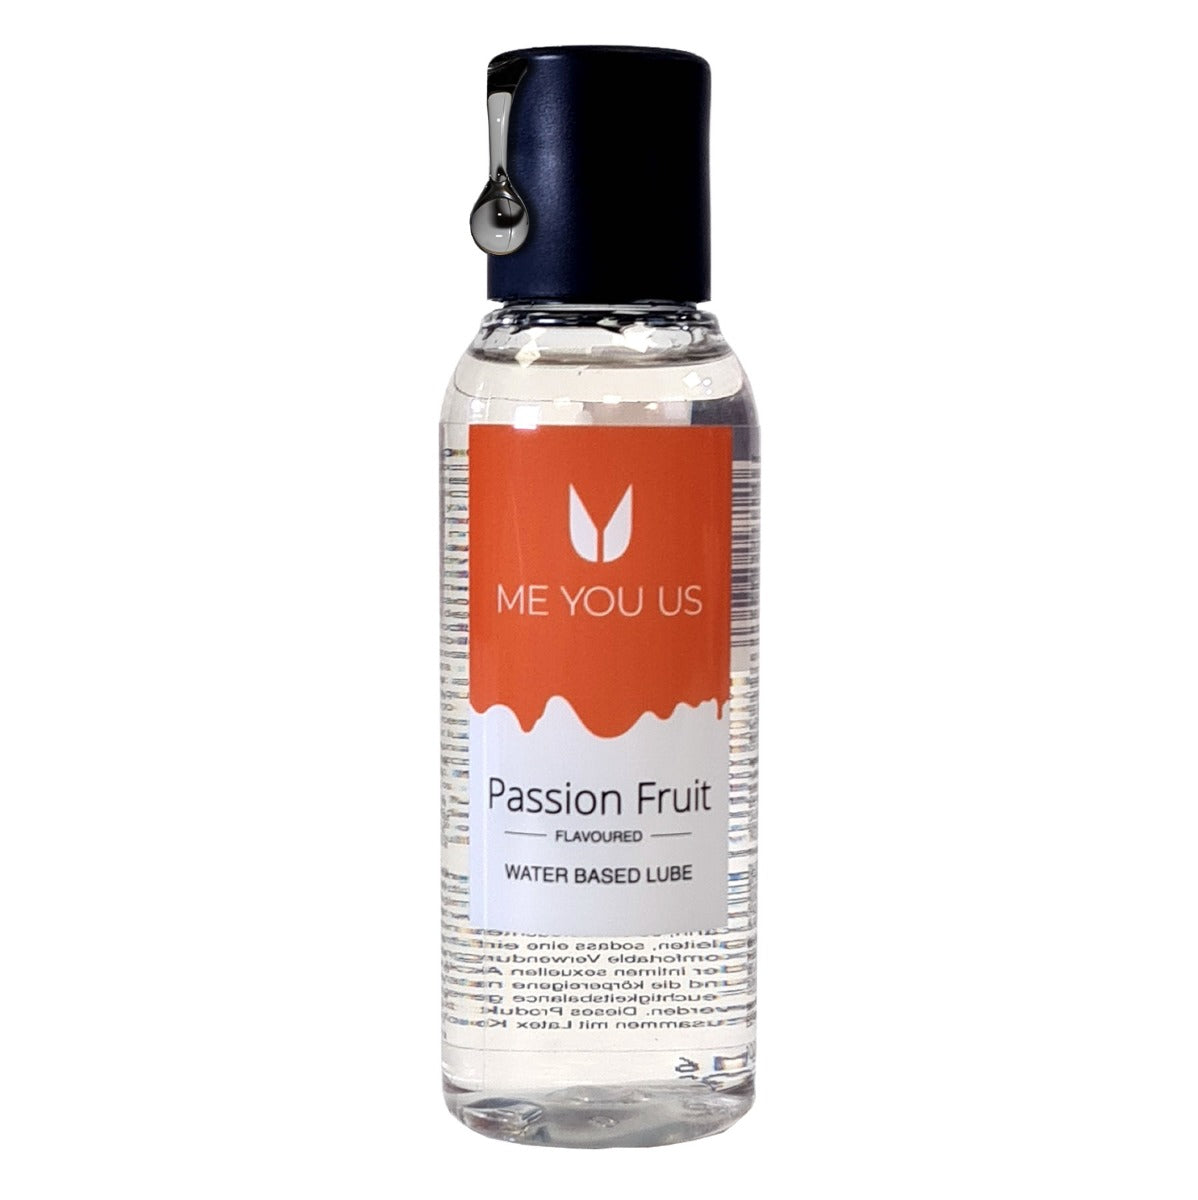 Me You Us | Passion Fruit Flavoured Water Based Lubricant - 100ml